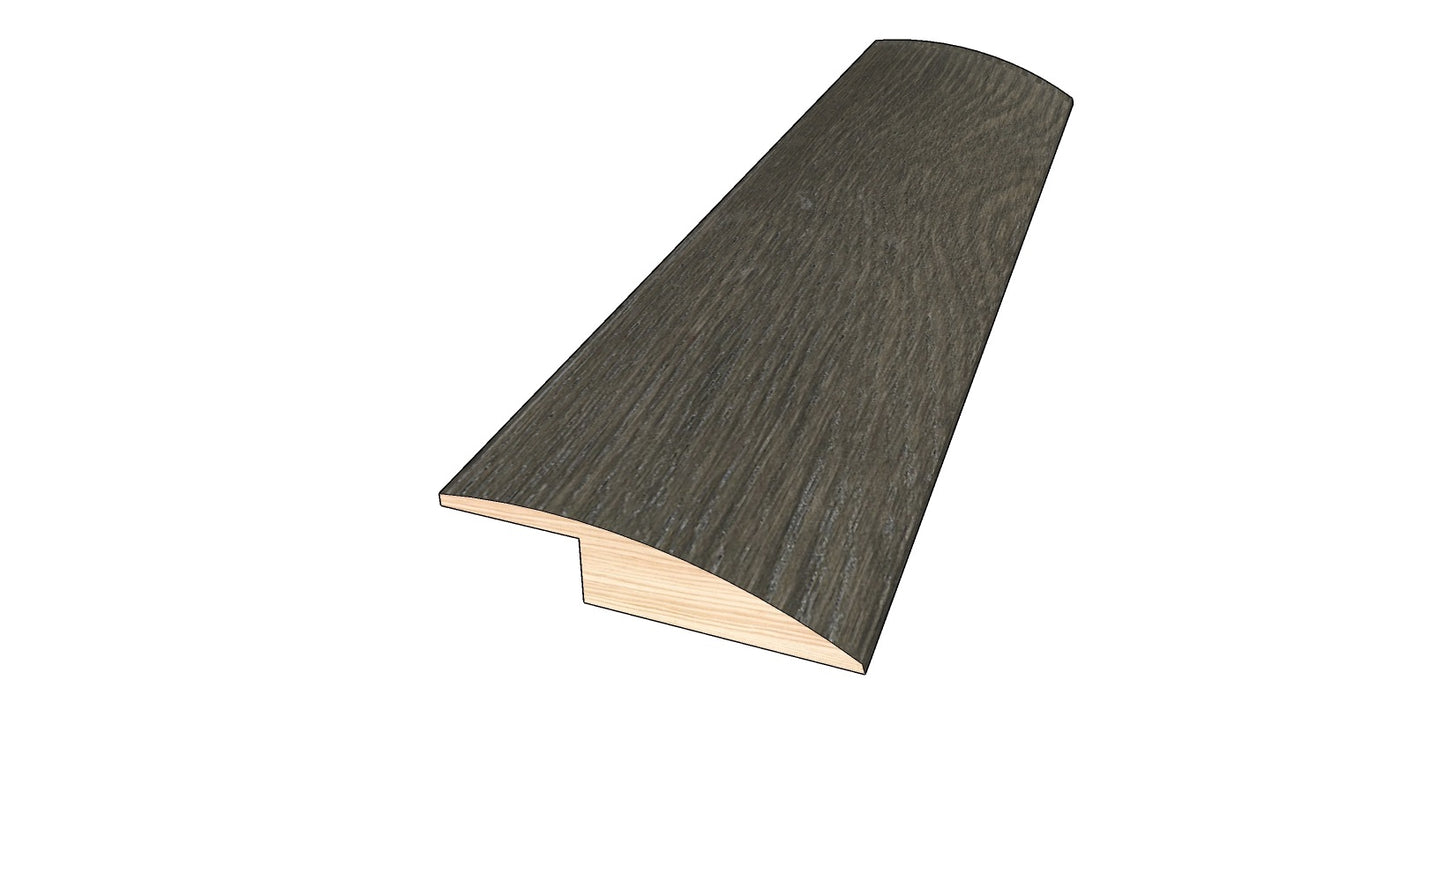 Timber Lodge 0.50 in. Thick x 1.50 in. Wide x 78 in. Length Hardwood Overlap Reducer Molding